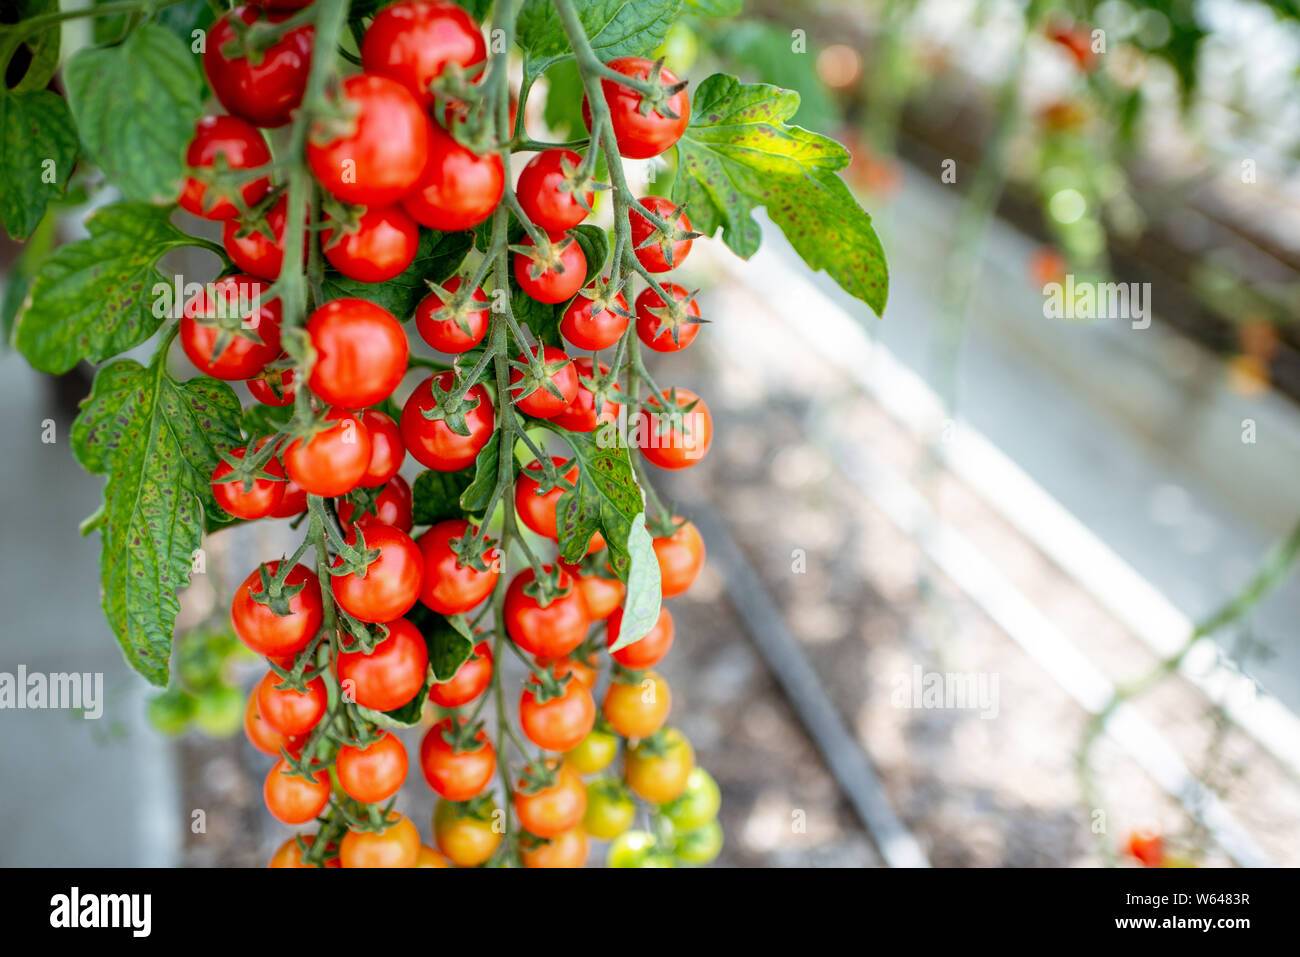 Branch with lots of growing cherry tomatoes on the organic plantation, close-up view Stock Photo